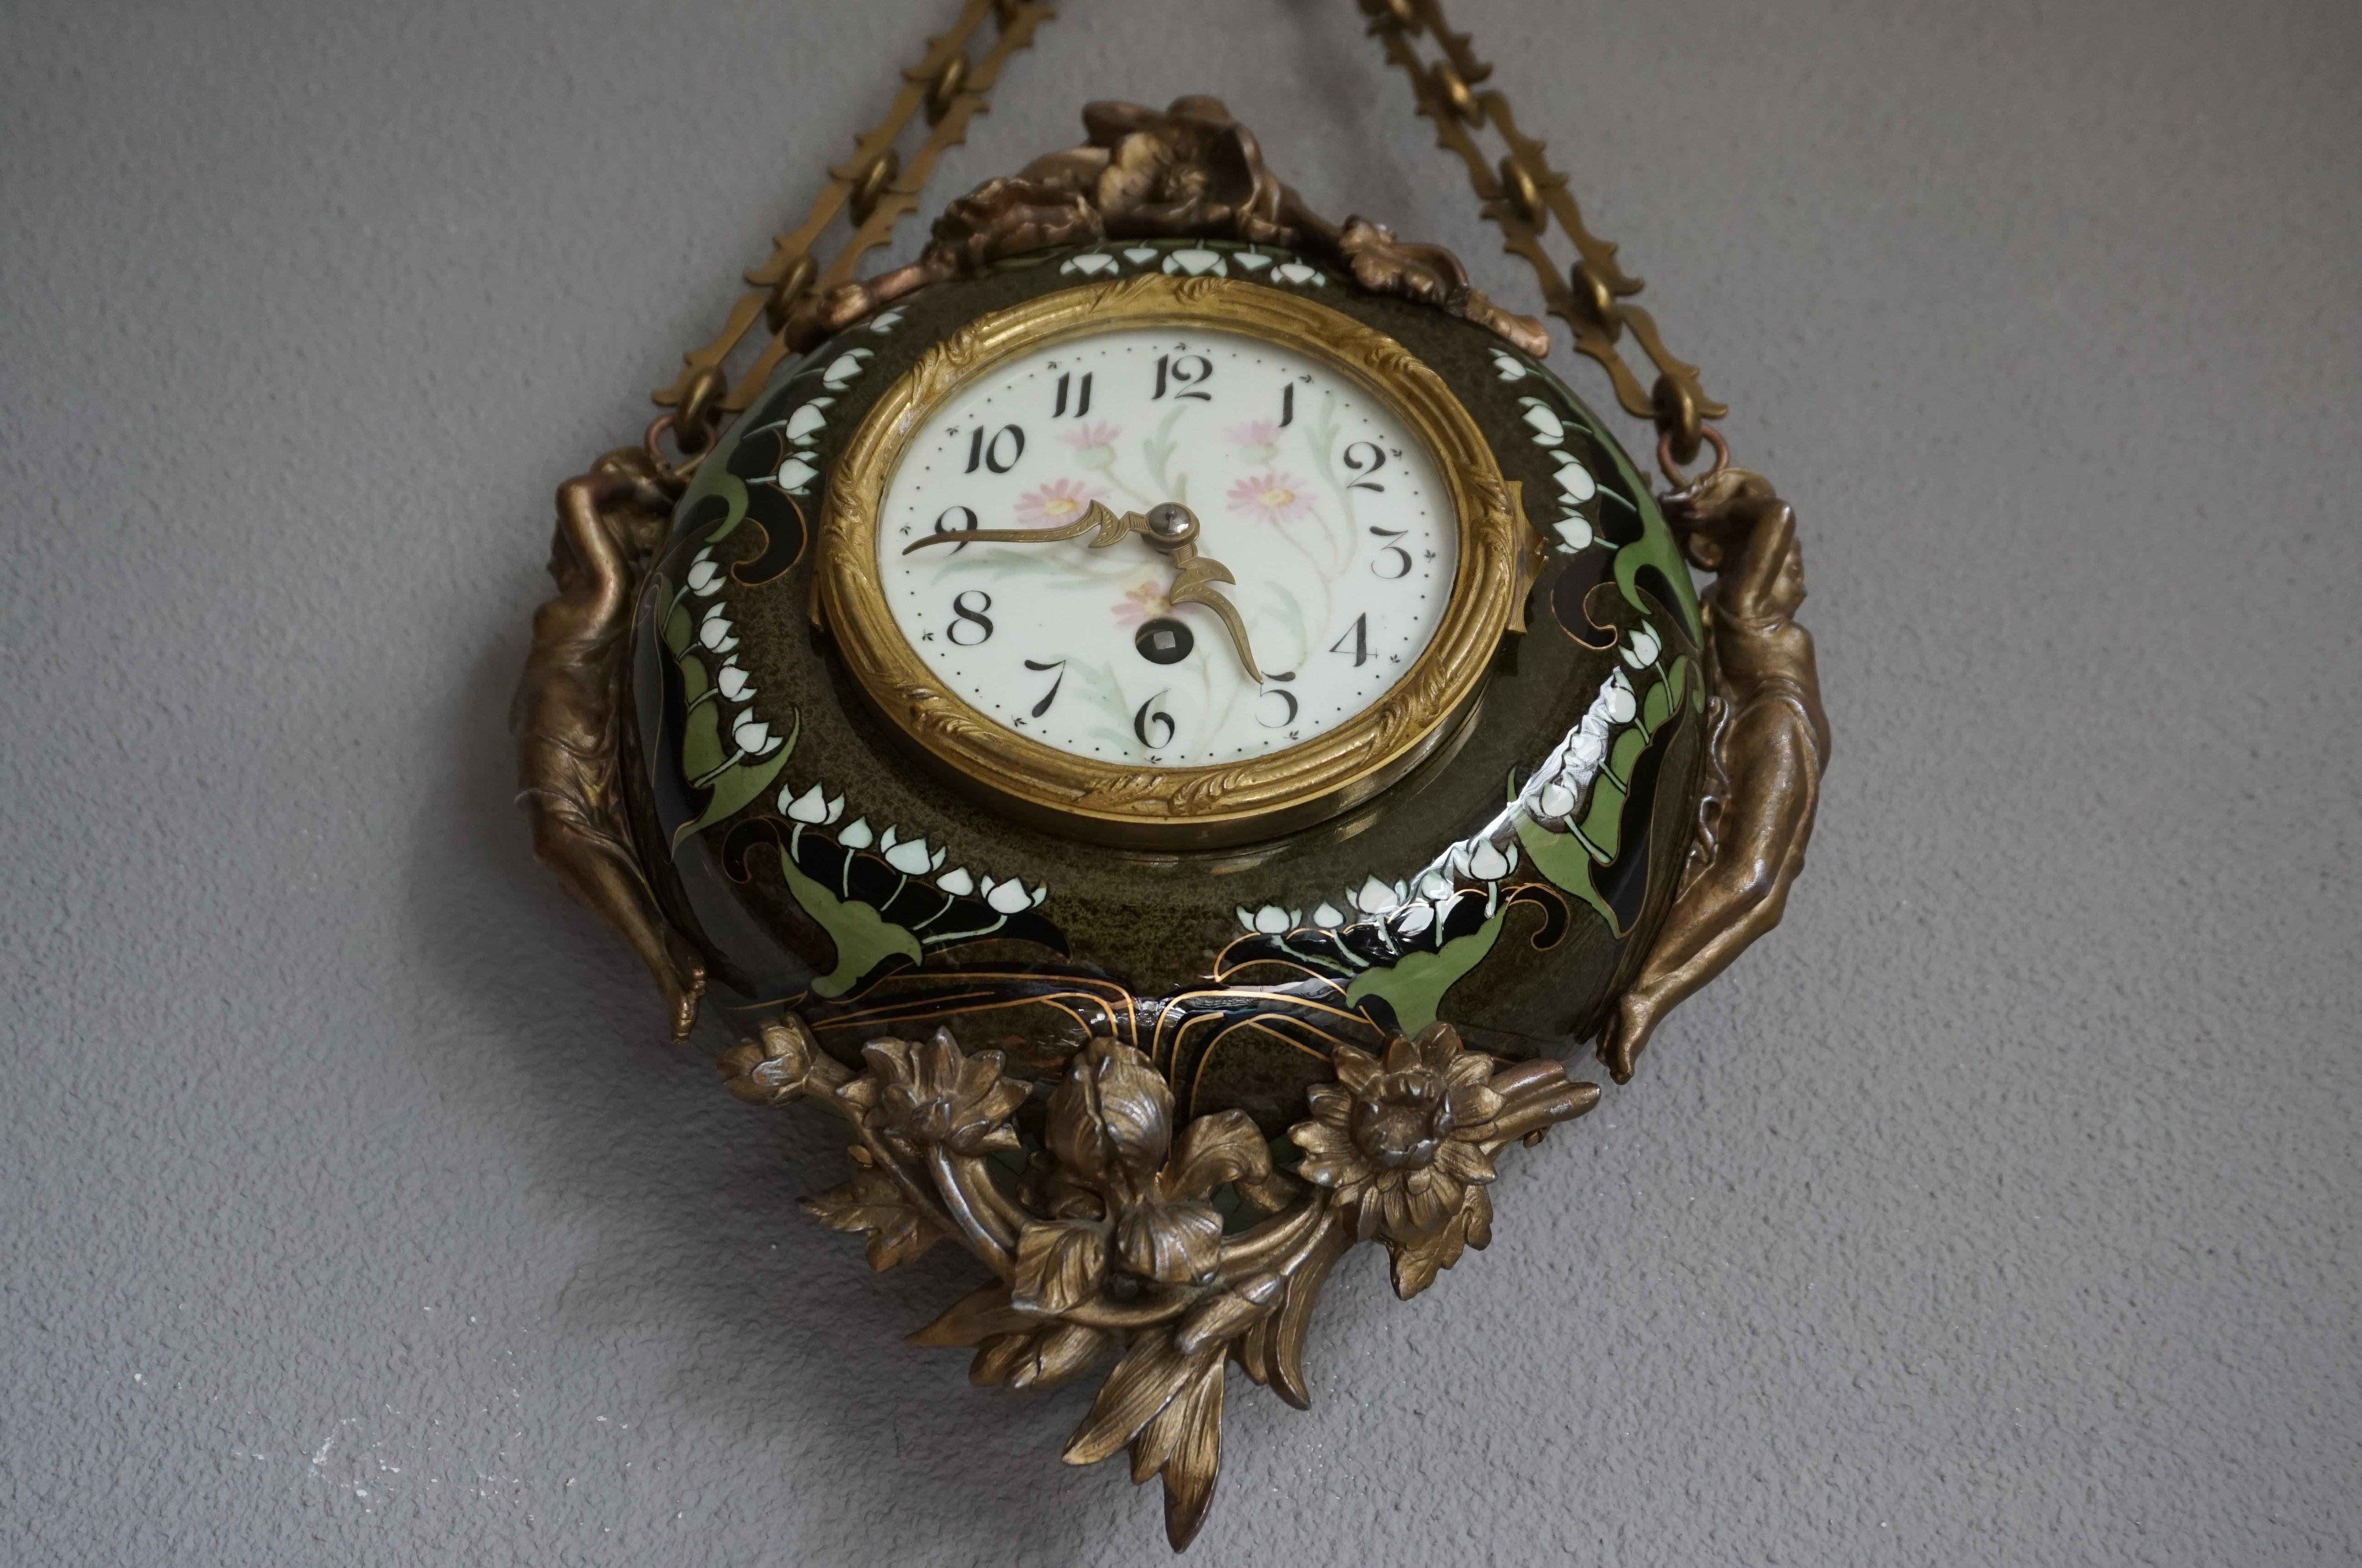 European Antique & Hand Painted Arts & Crafts Majolica Wall Clock with Enameled Dial Face